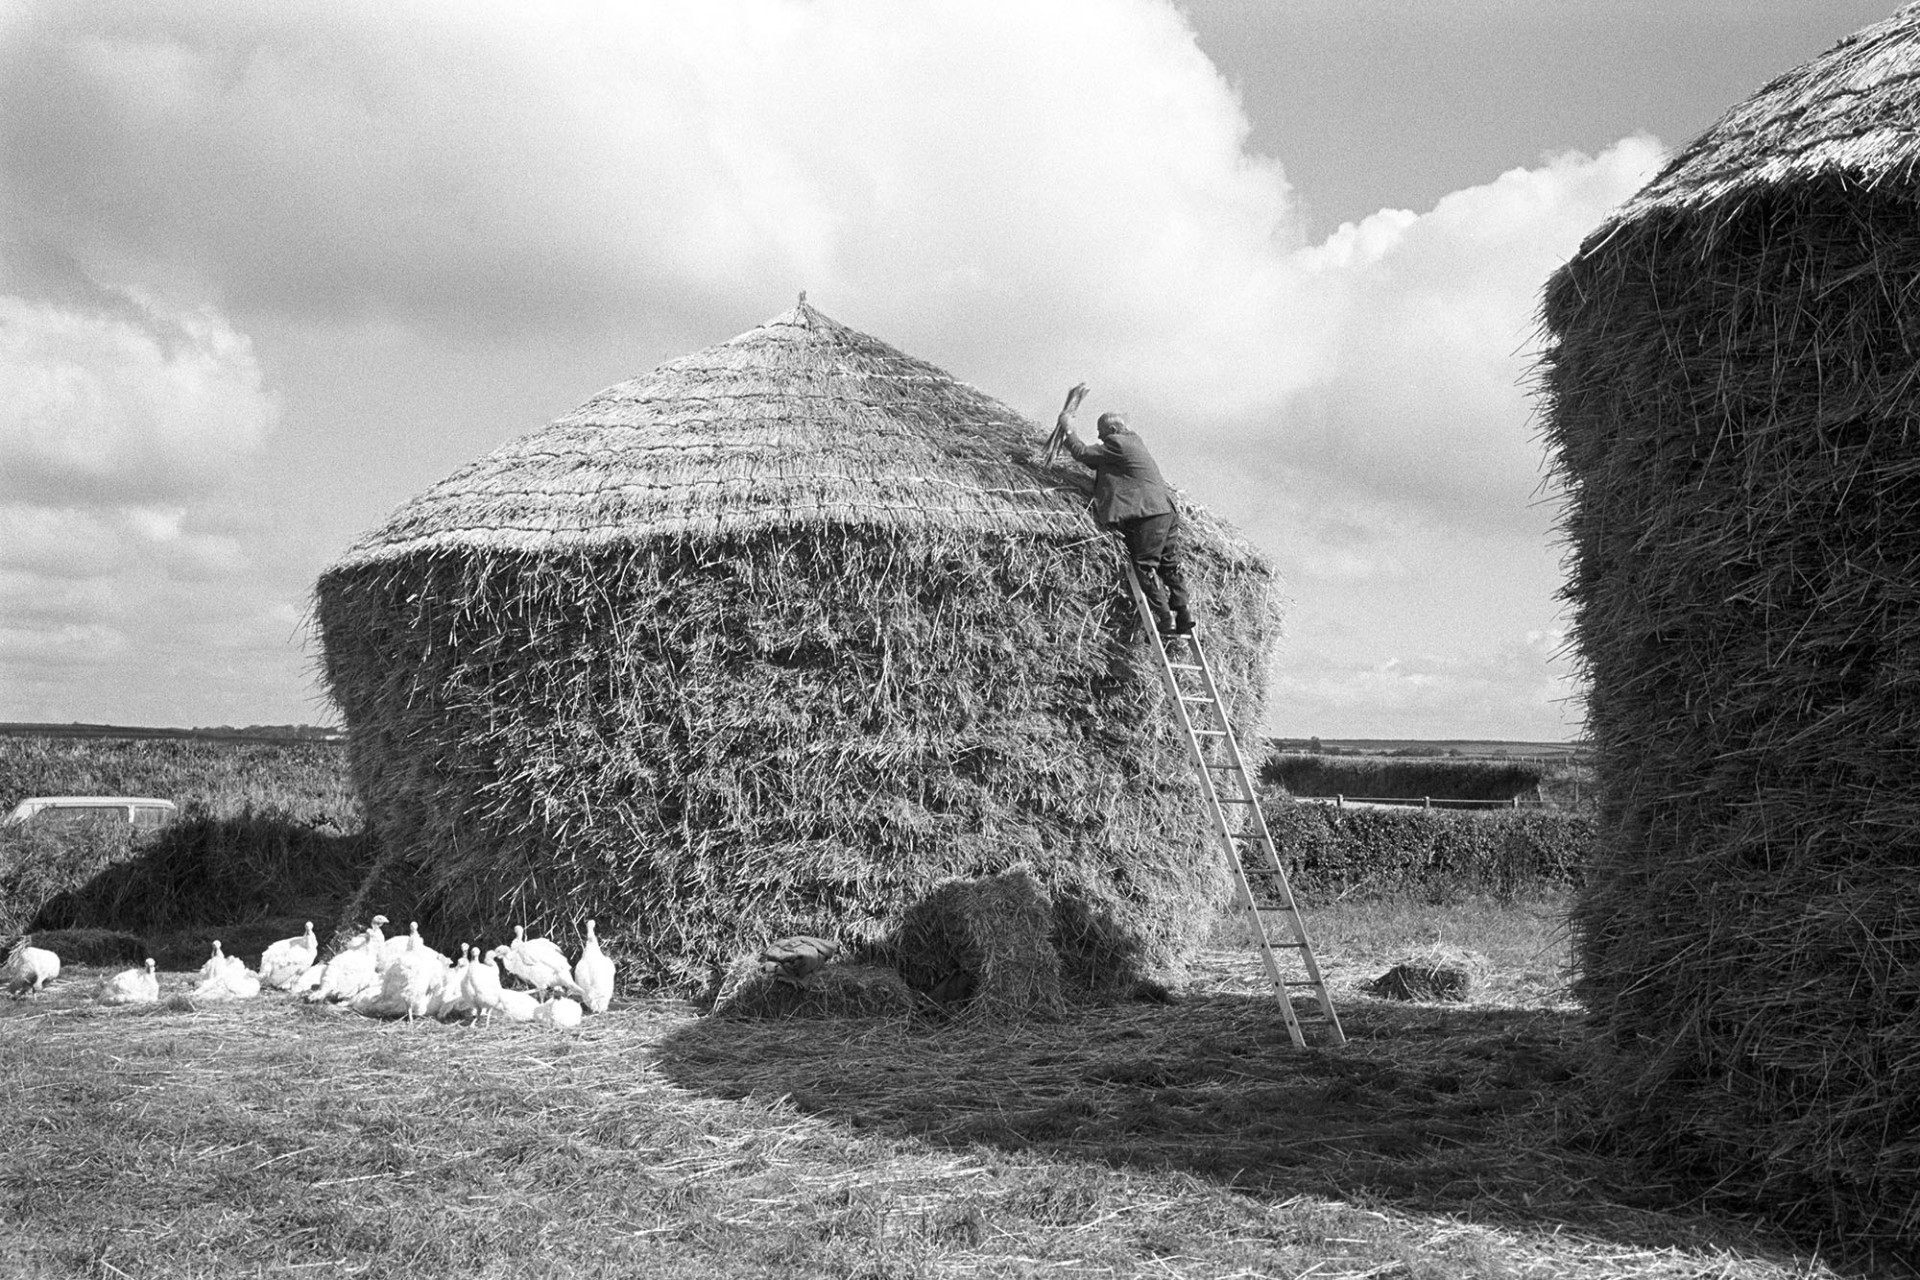 Thatcher thatching wheat rick, his motorbike parked in front. Young turkeys feeding. 
[Bill Hammond thatching a wheat rick in a  field at Westacott, Riddlecombe. He is securing the thatch with a spar. Young turkeys are feeding at the bottom of the rick and the top of a car is visible above the hedgerow of the field.]